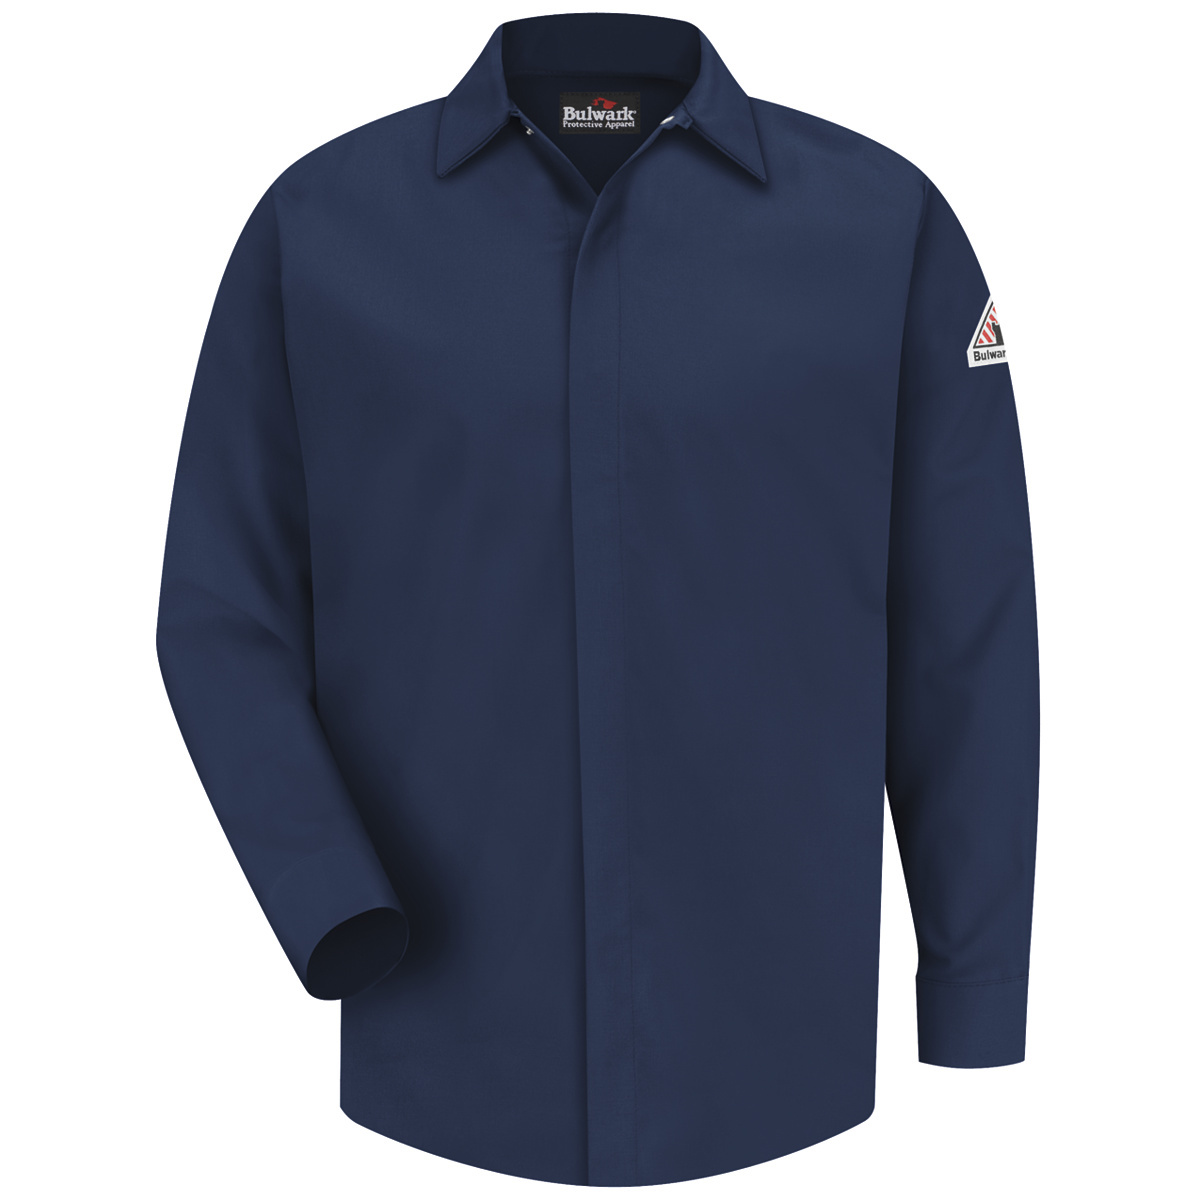 Bulwark® Large Tall Navy Blue CoolTouch®/Modacrylic/Lyocell/Aramid Flame Resistant Work Shirt With Gripper Front Closure